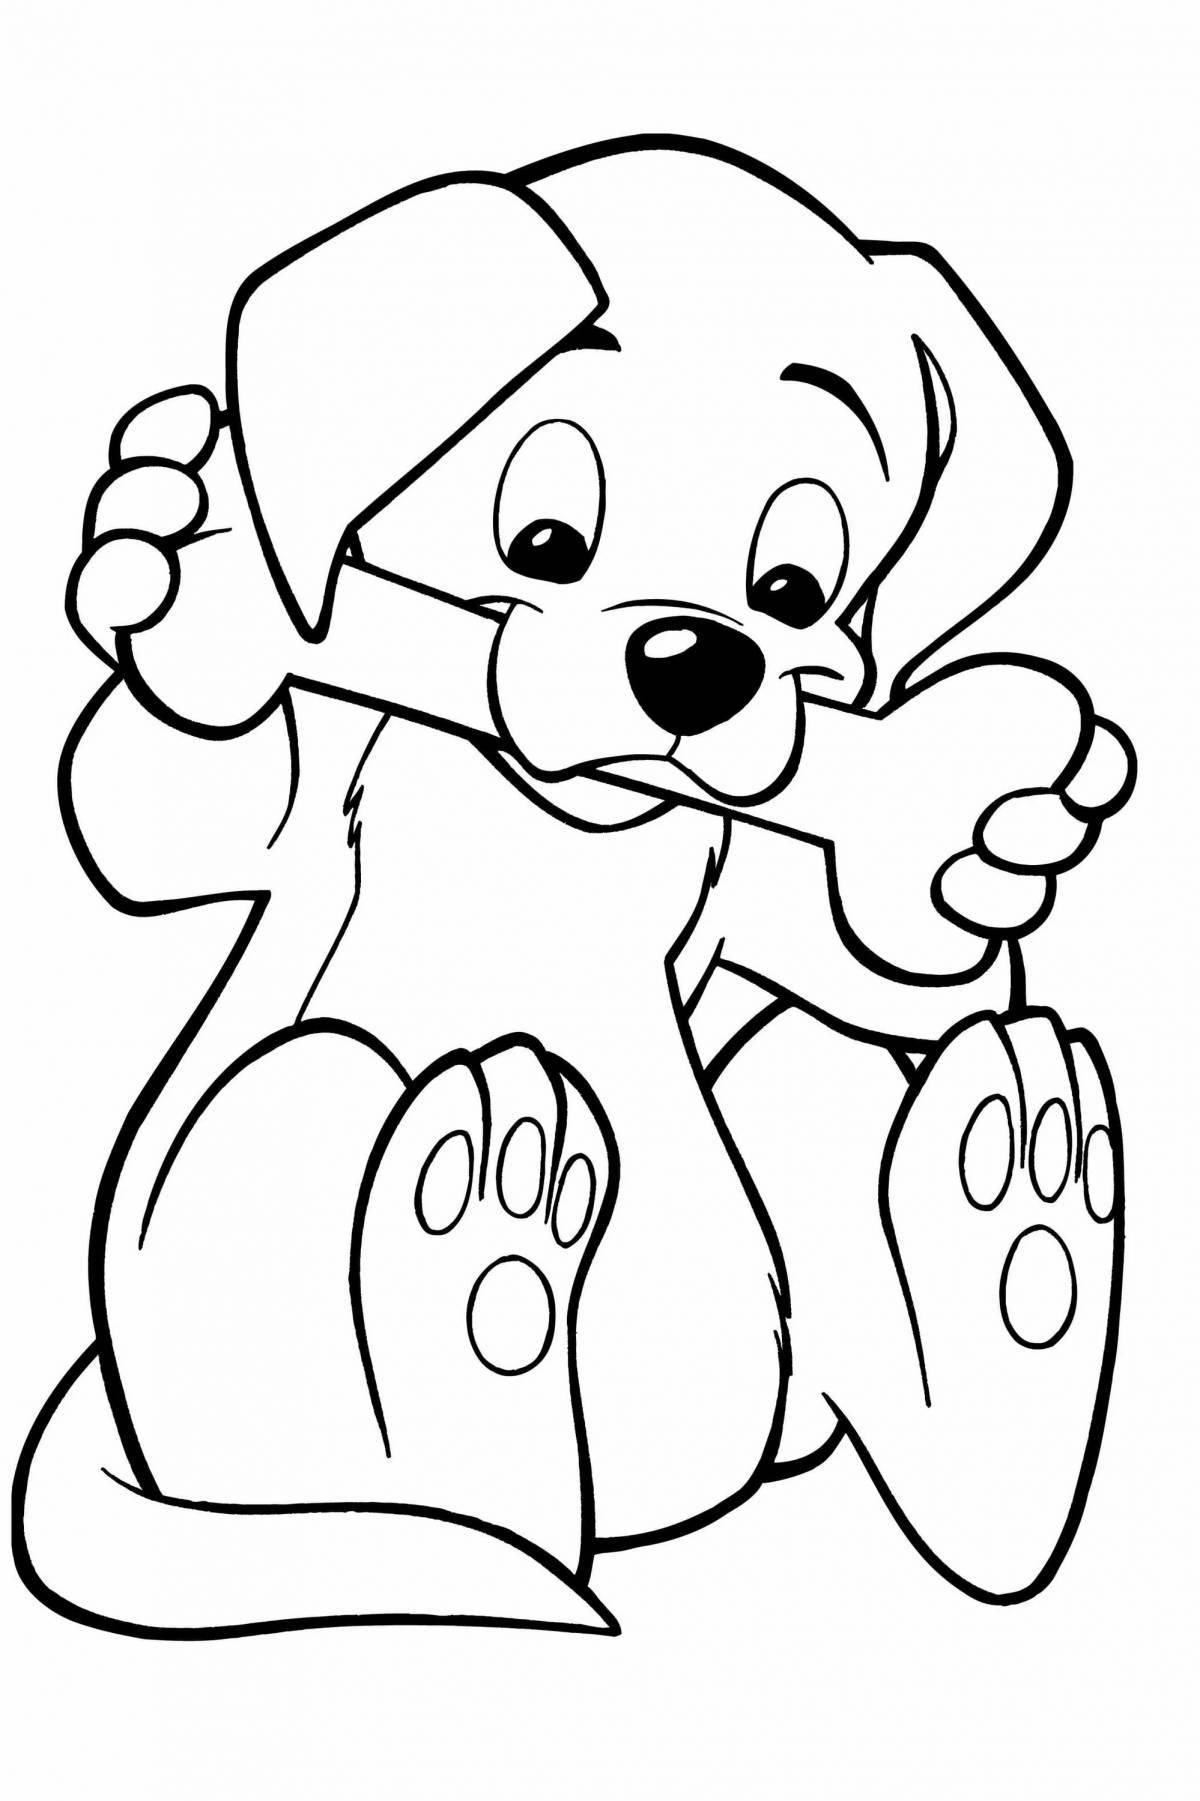 Adorable dog coloring pages for boys